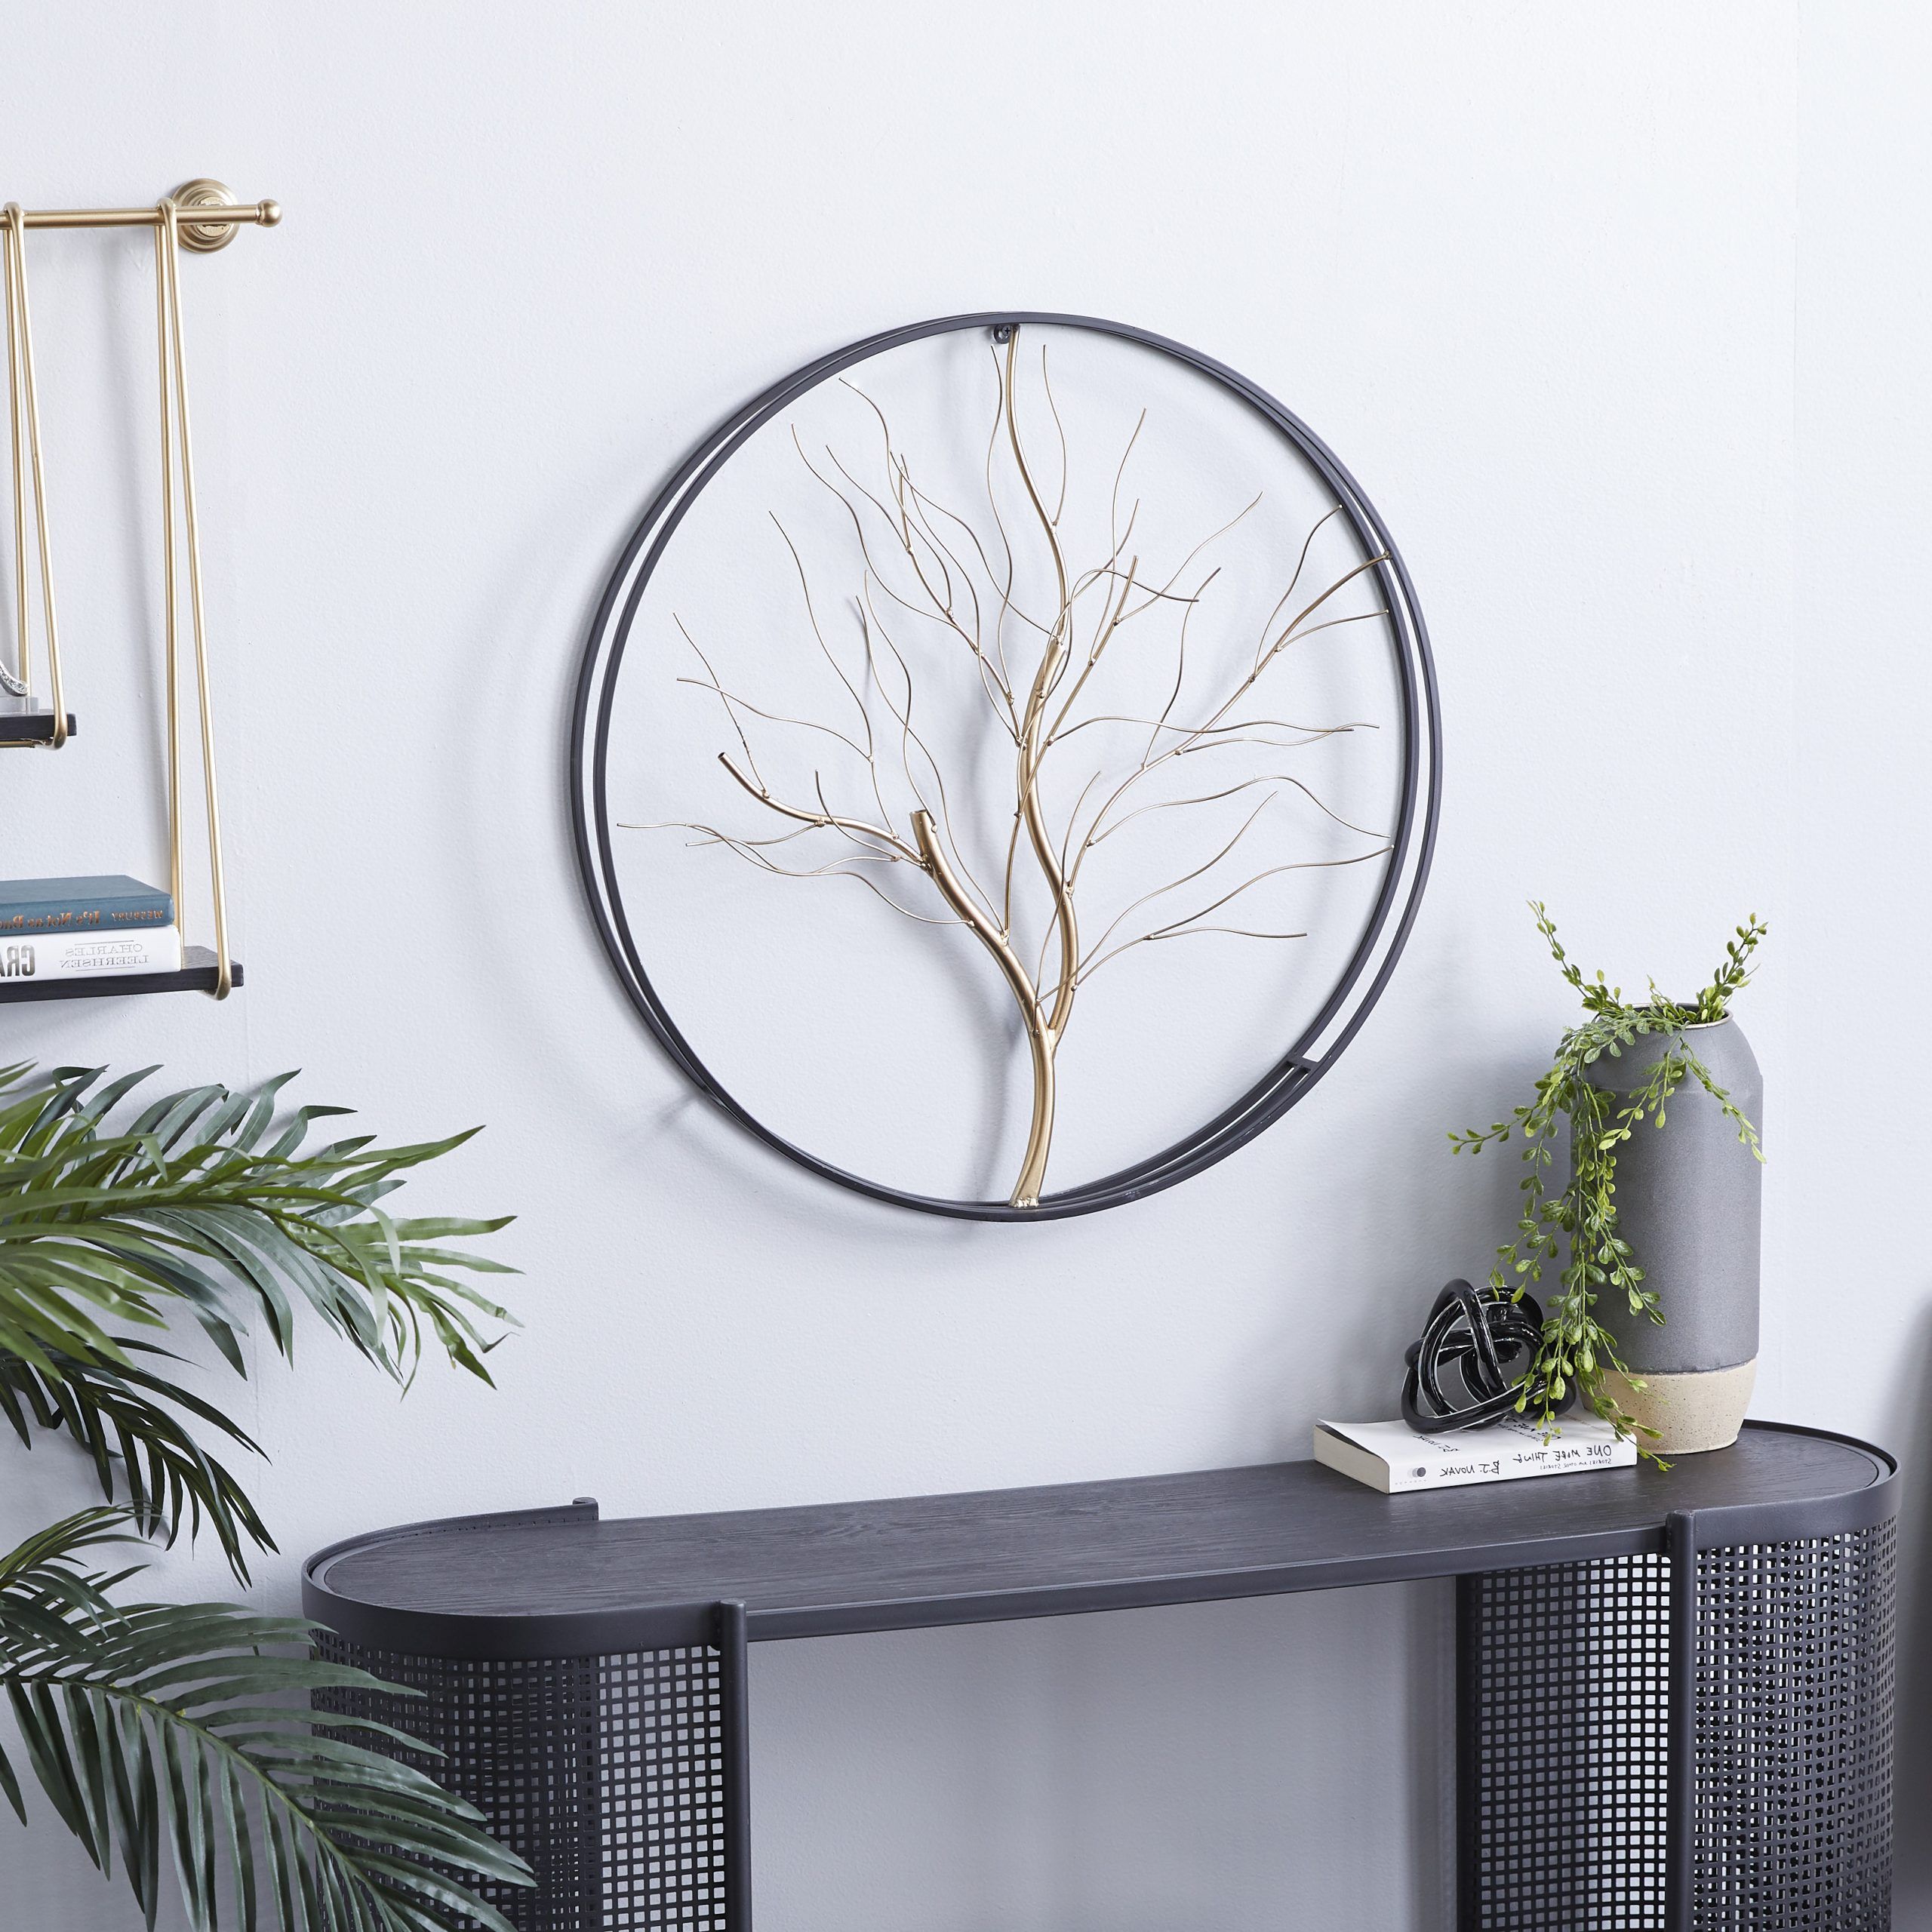 Current Decmode Large Round Glam Metal Wall Décor W/ Black Metal Frame And Tree With Spiral Circles Metal Wall Art (View 3 of 15)